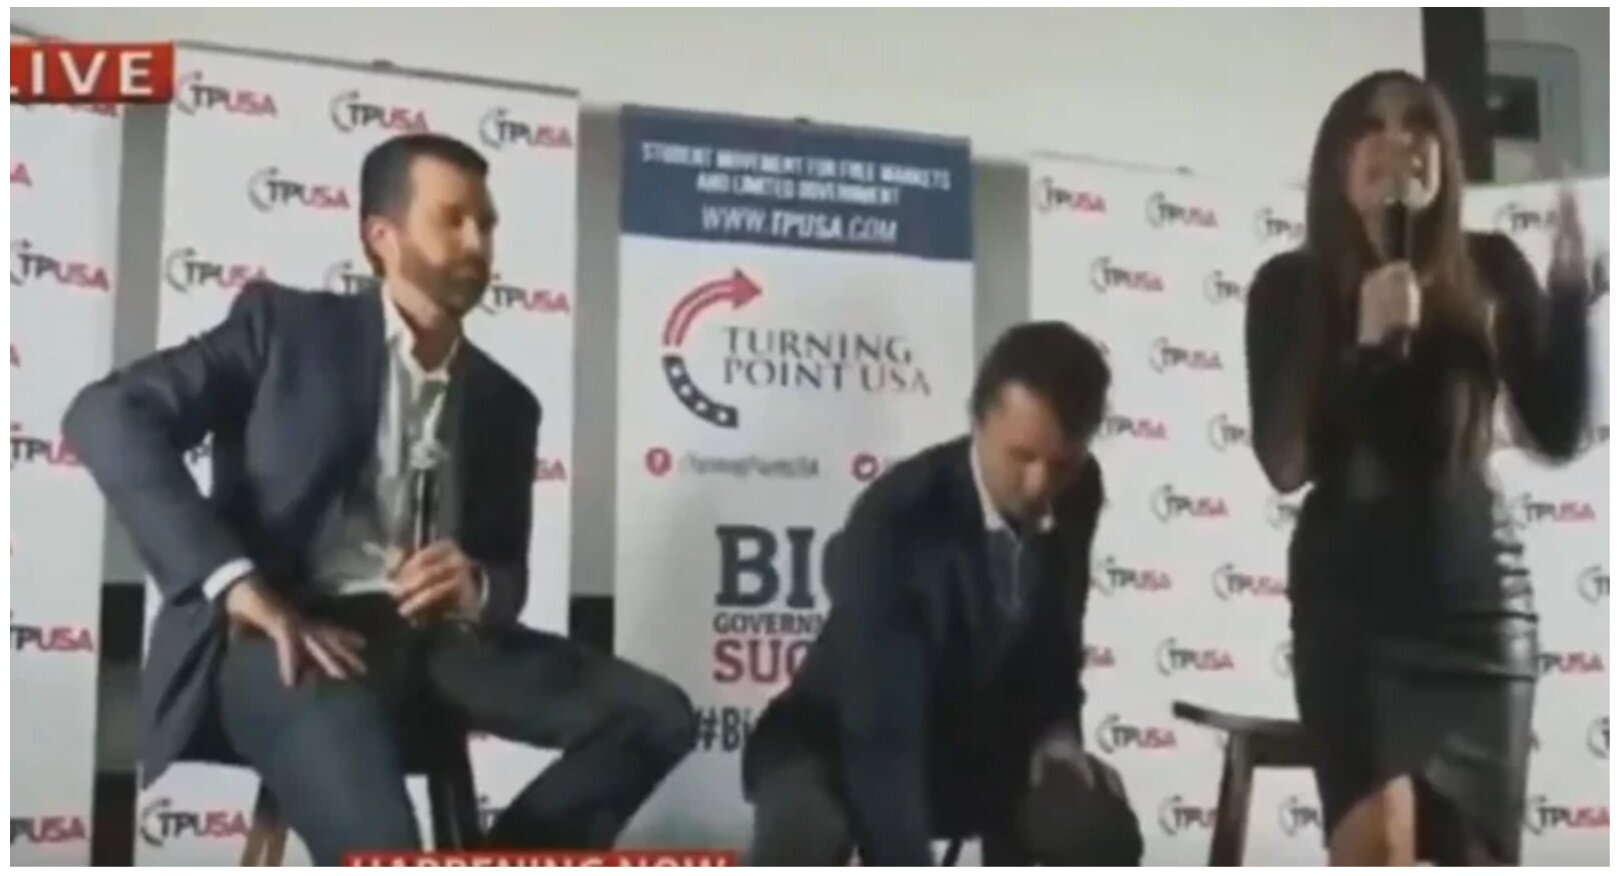 WATCH: Donald Trump Jr. booed off stage at UCLA book event